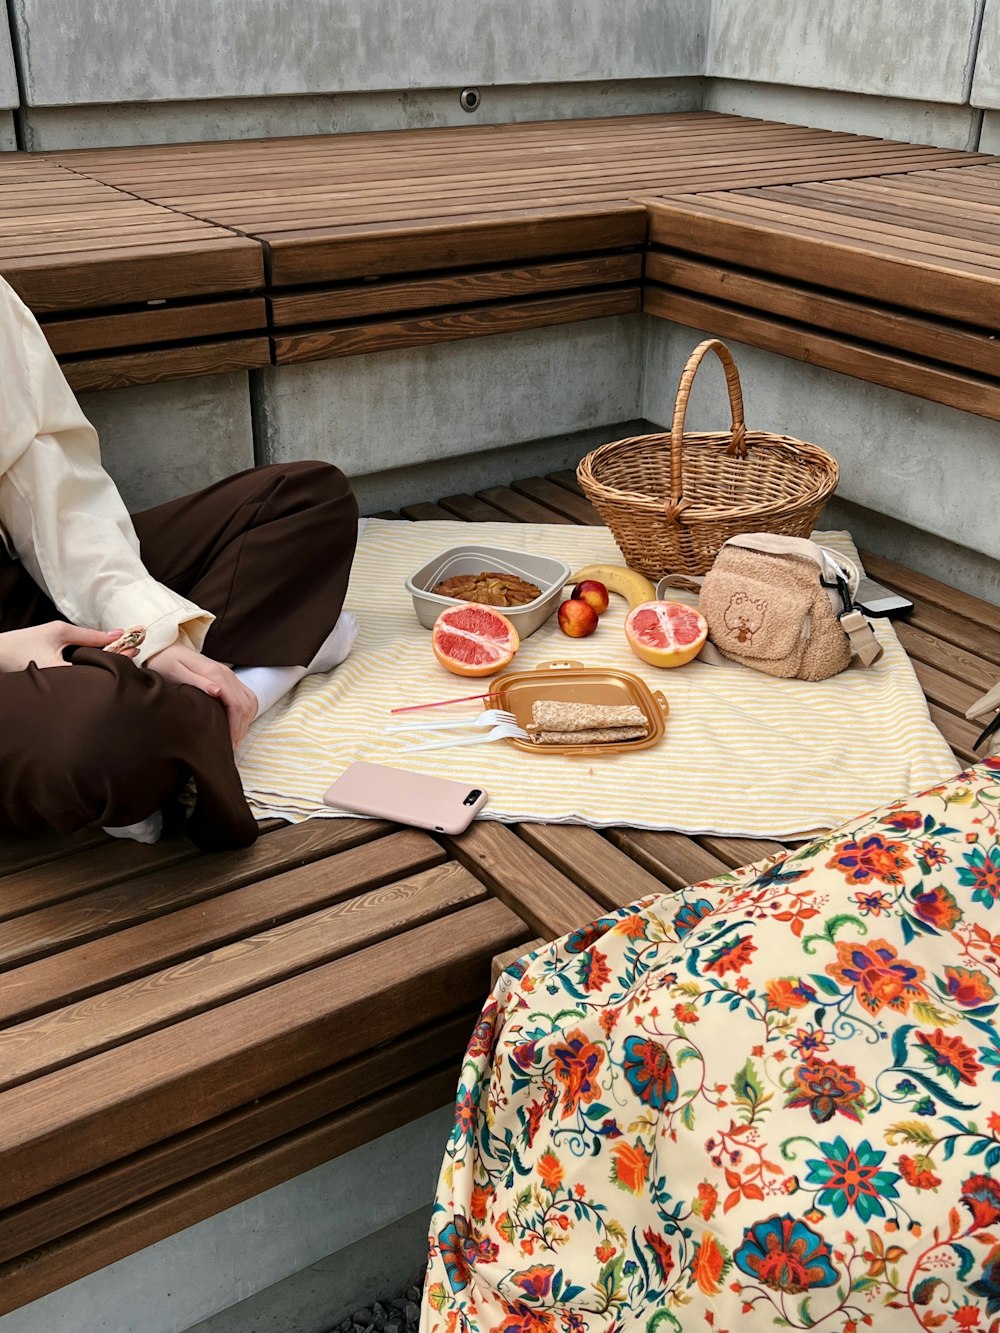 a person sitting on a bench with food and a basket